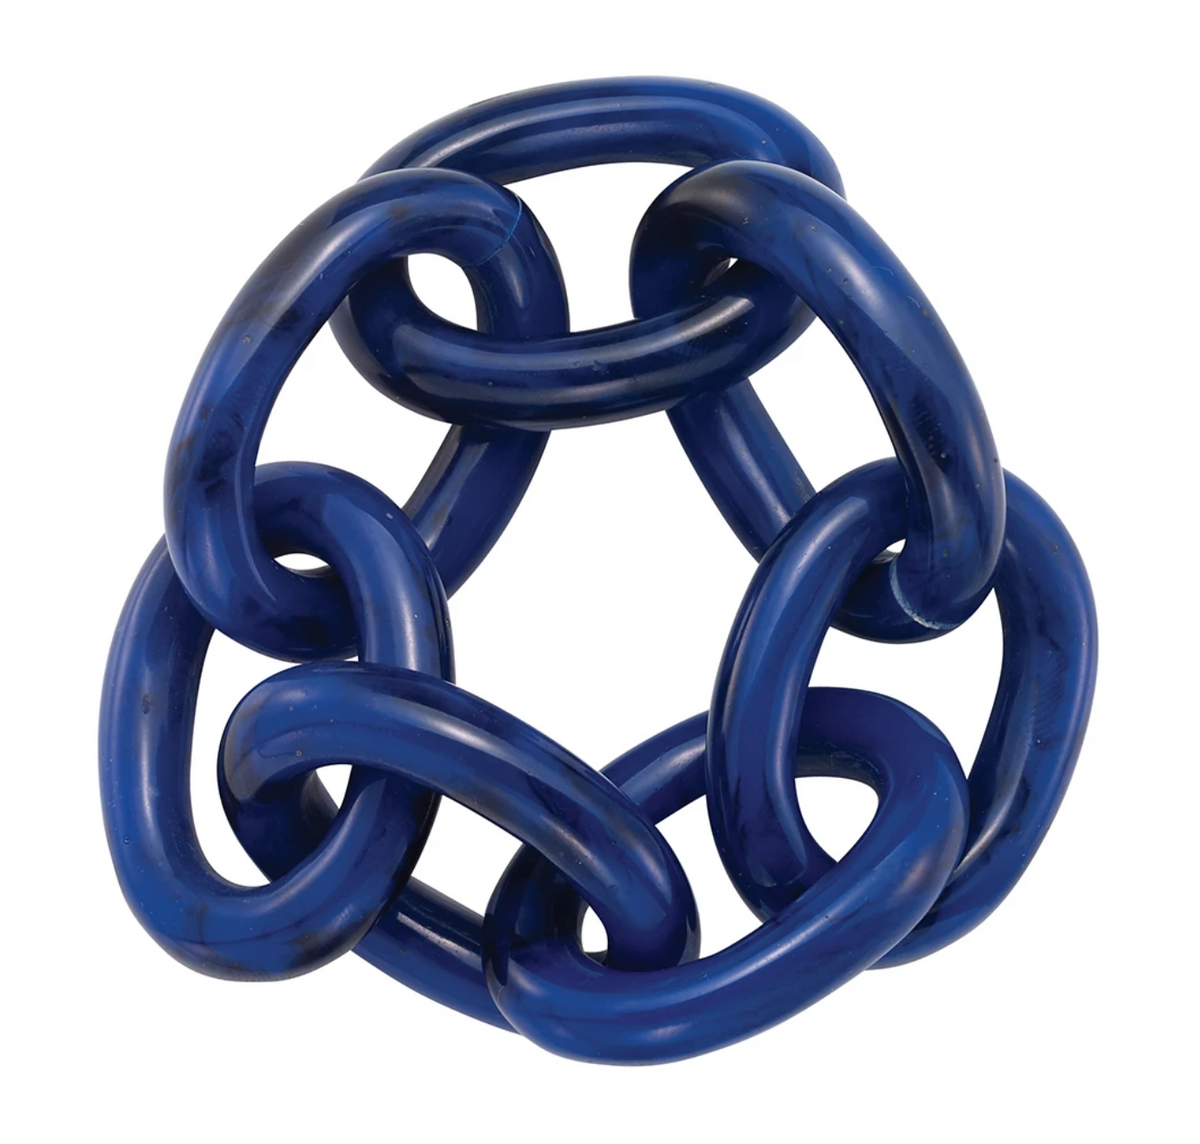 Chain Link Napkin Ring Set of 4 - Navy